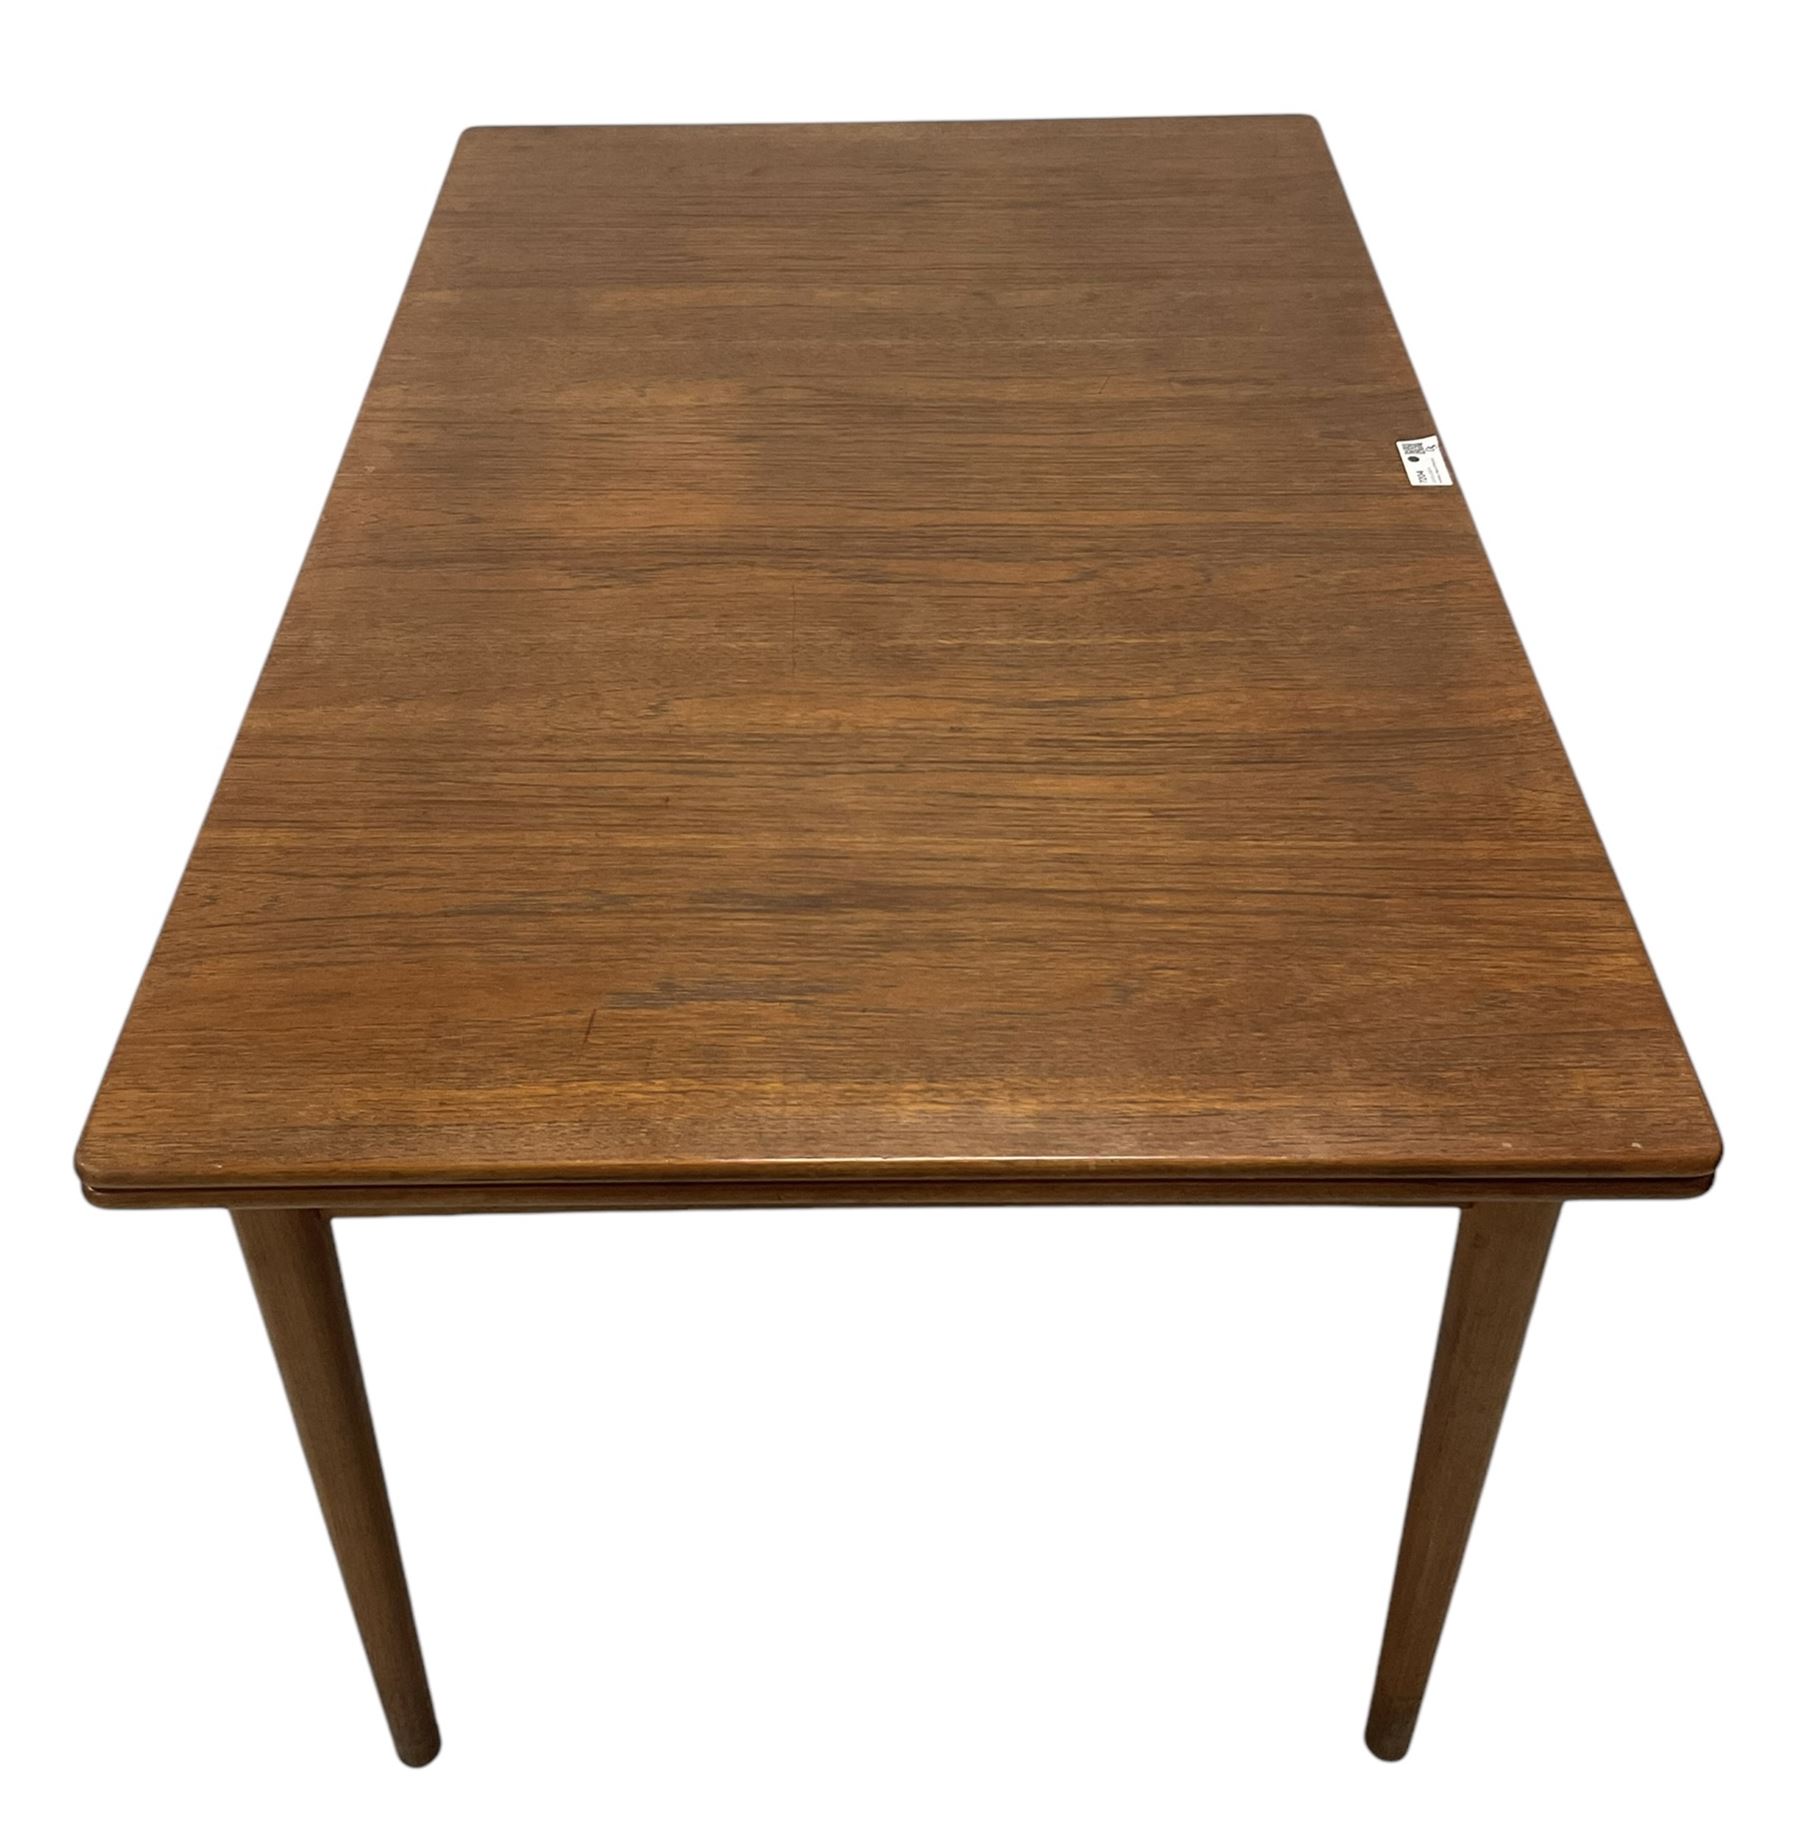 Mid-20th century teak extending draw-leaf dining table - Image 6 of 6